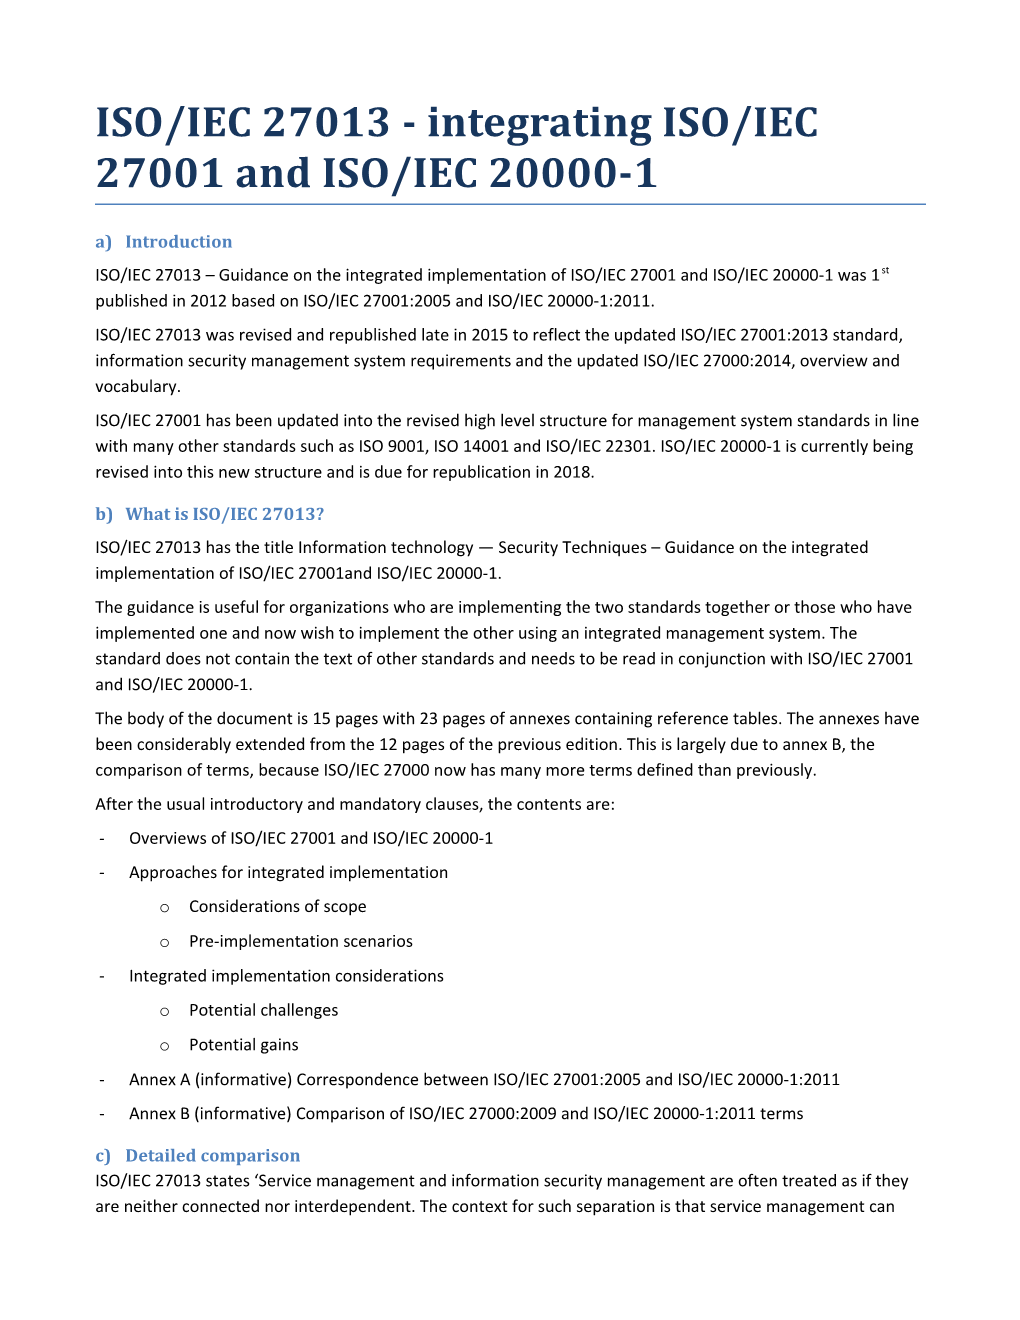 ISO/IEC 27013 - Integrating ISO/IEC 27001 and ISO/IEC 20000-1